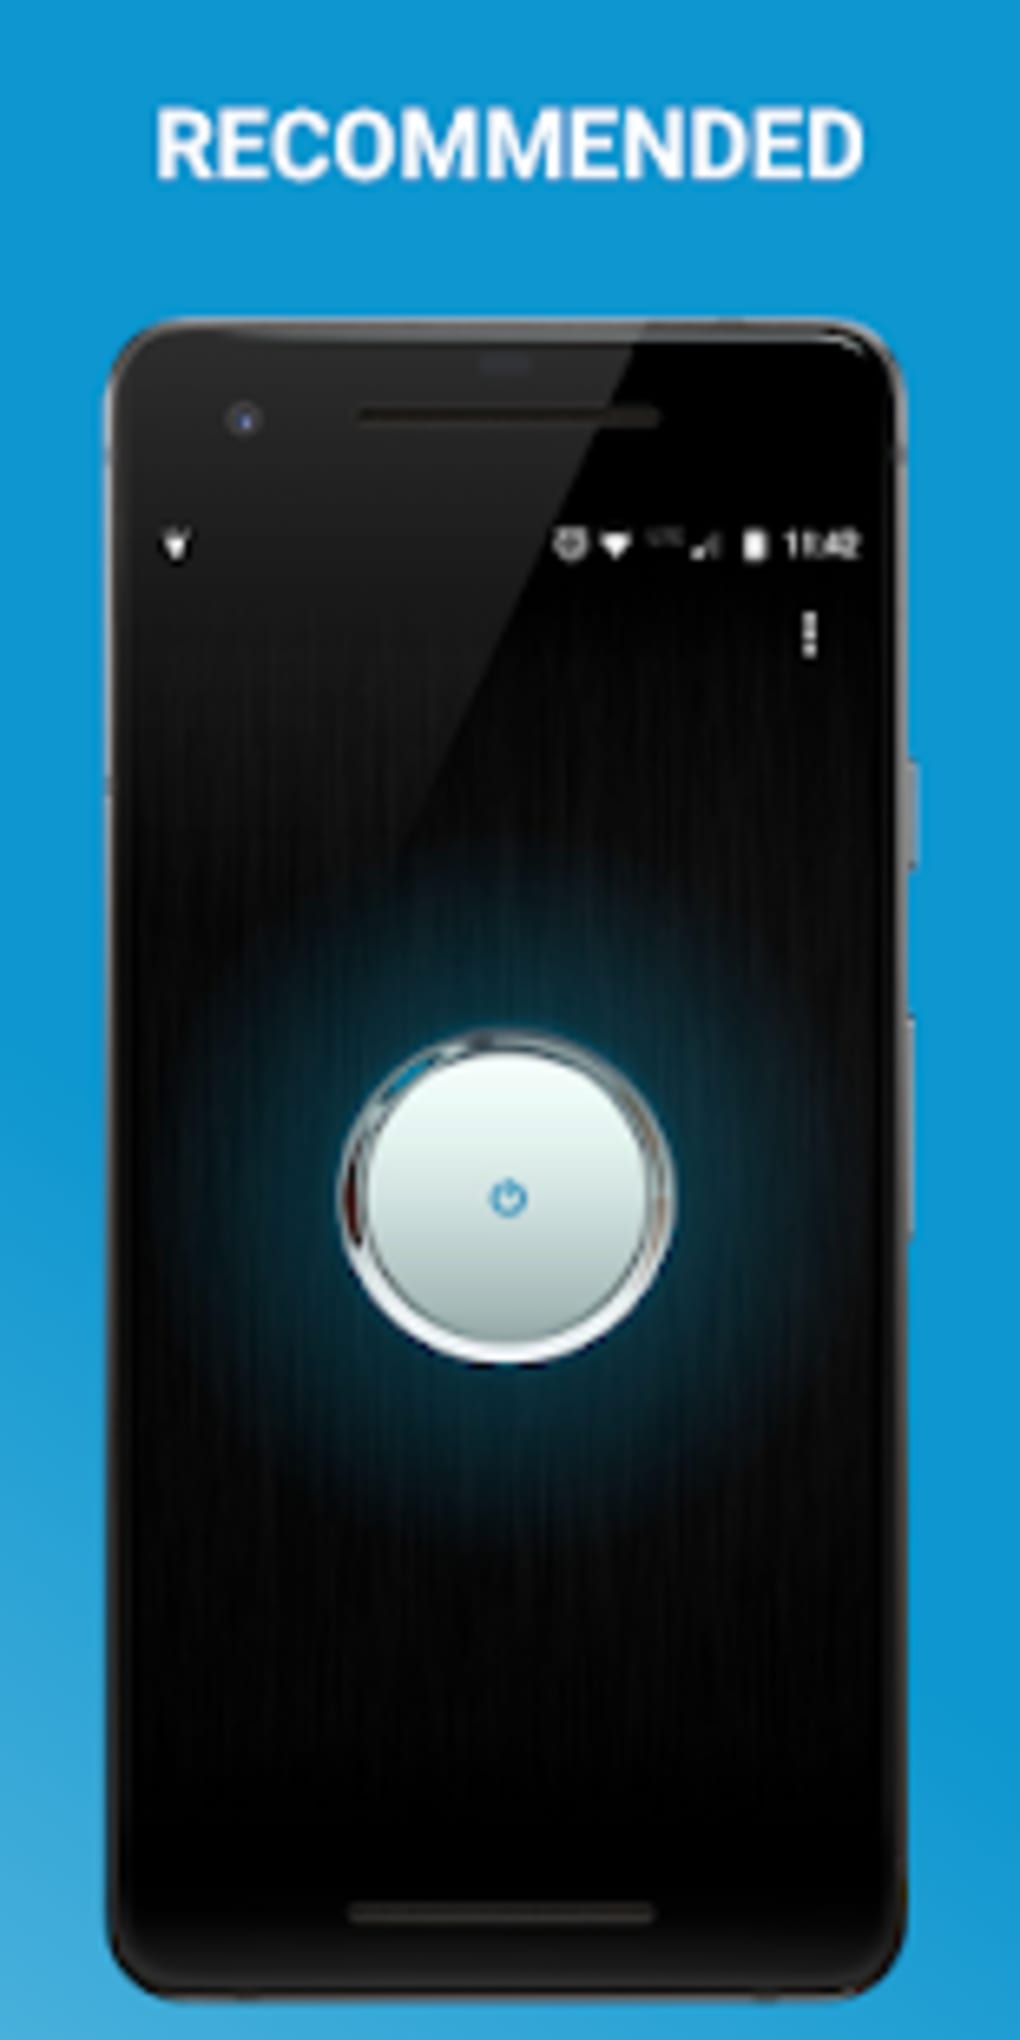 Net-VISION for AQUOS APK Download for Android - AndroidFreeware